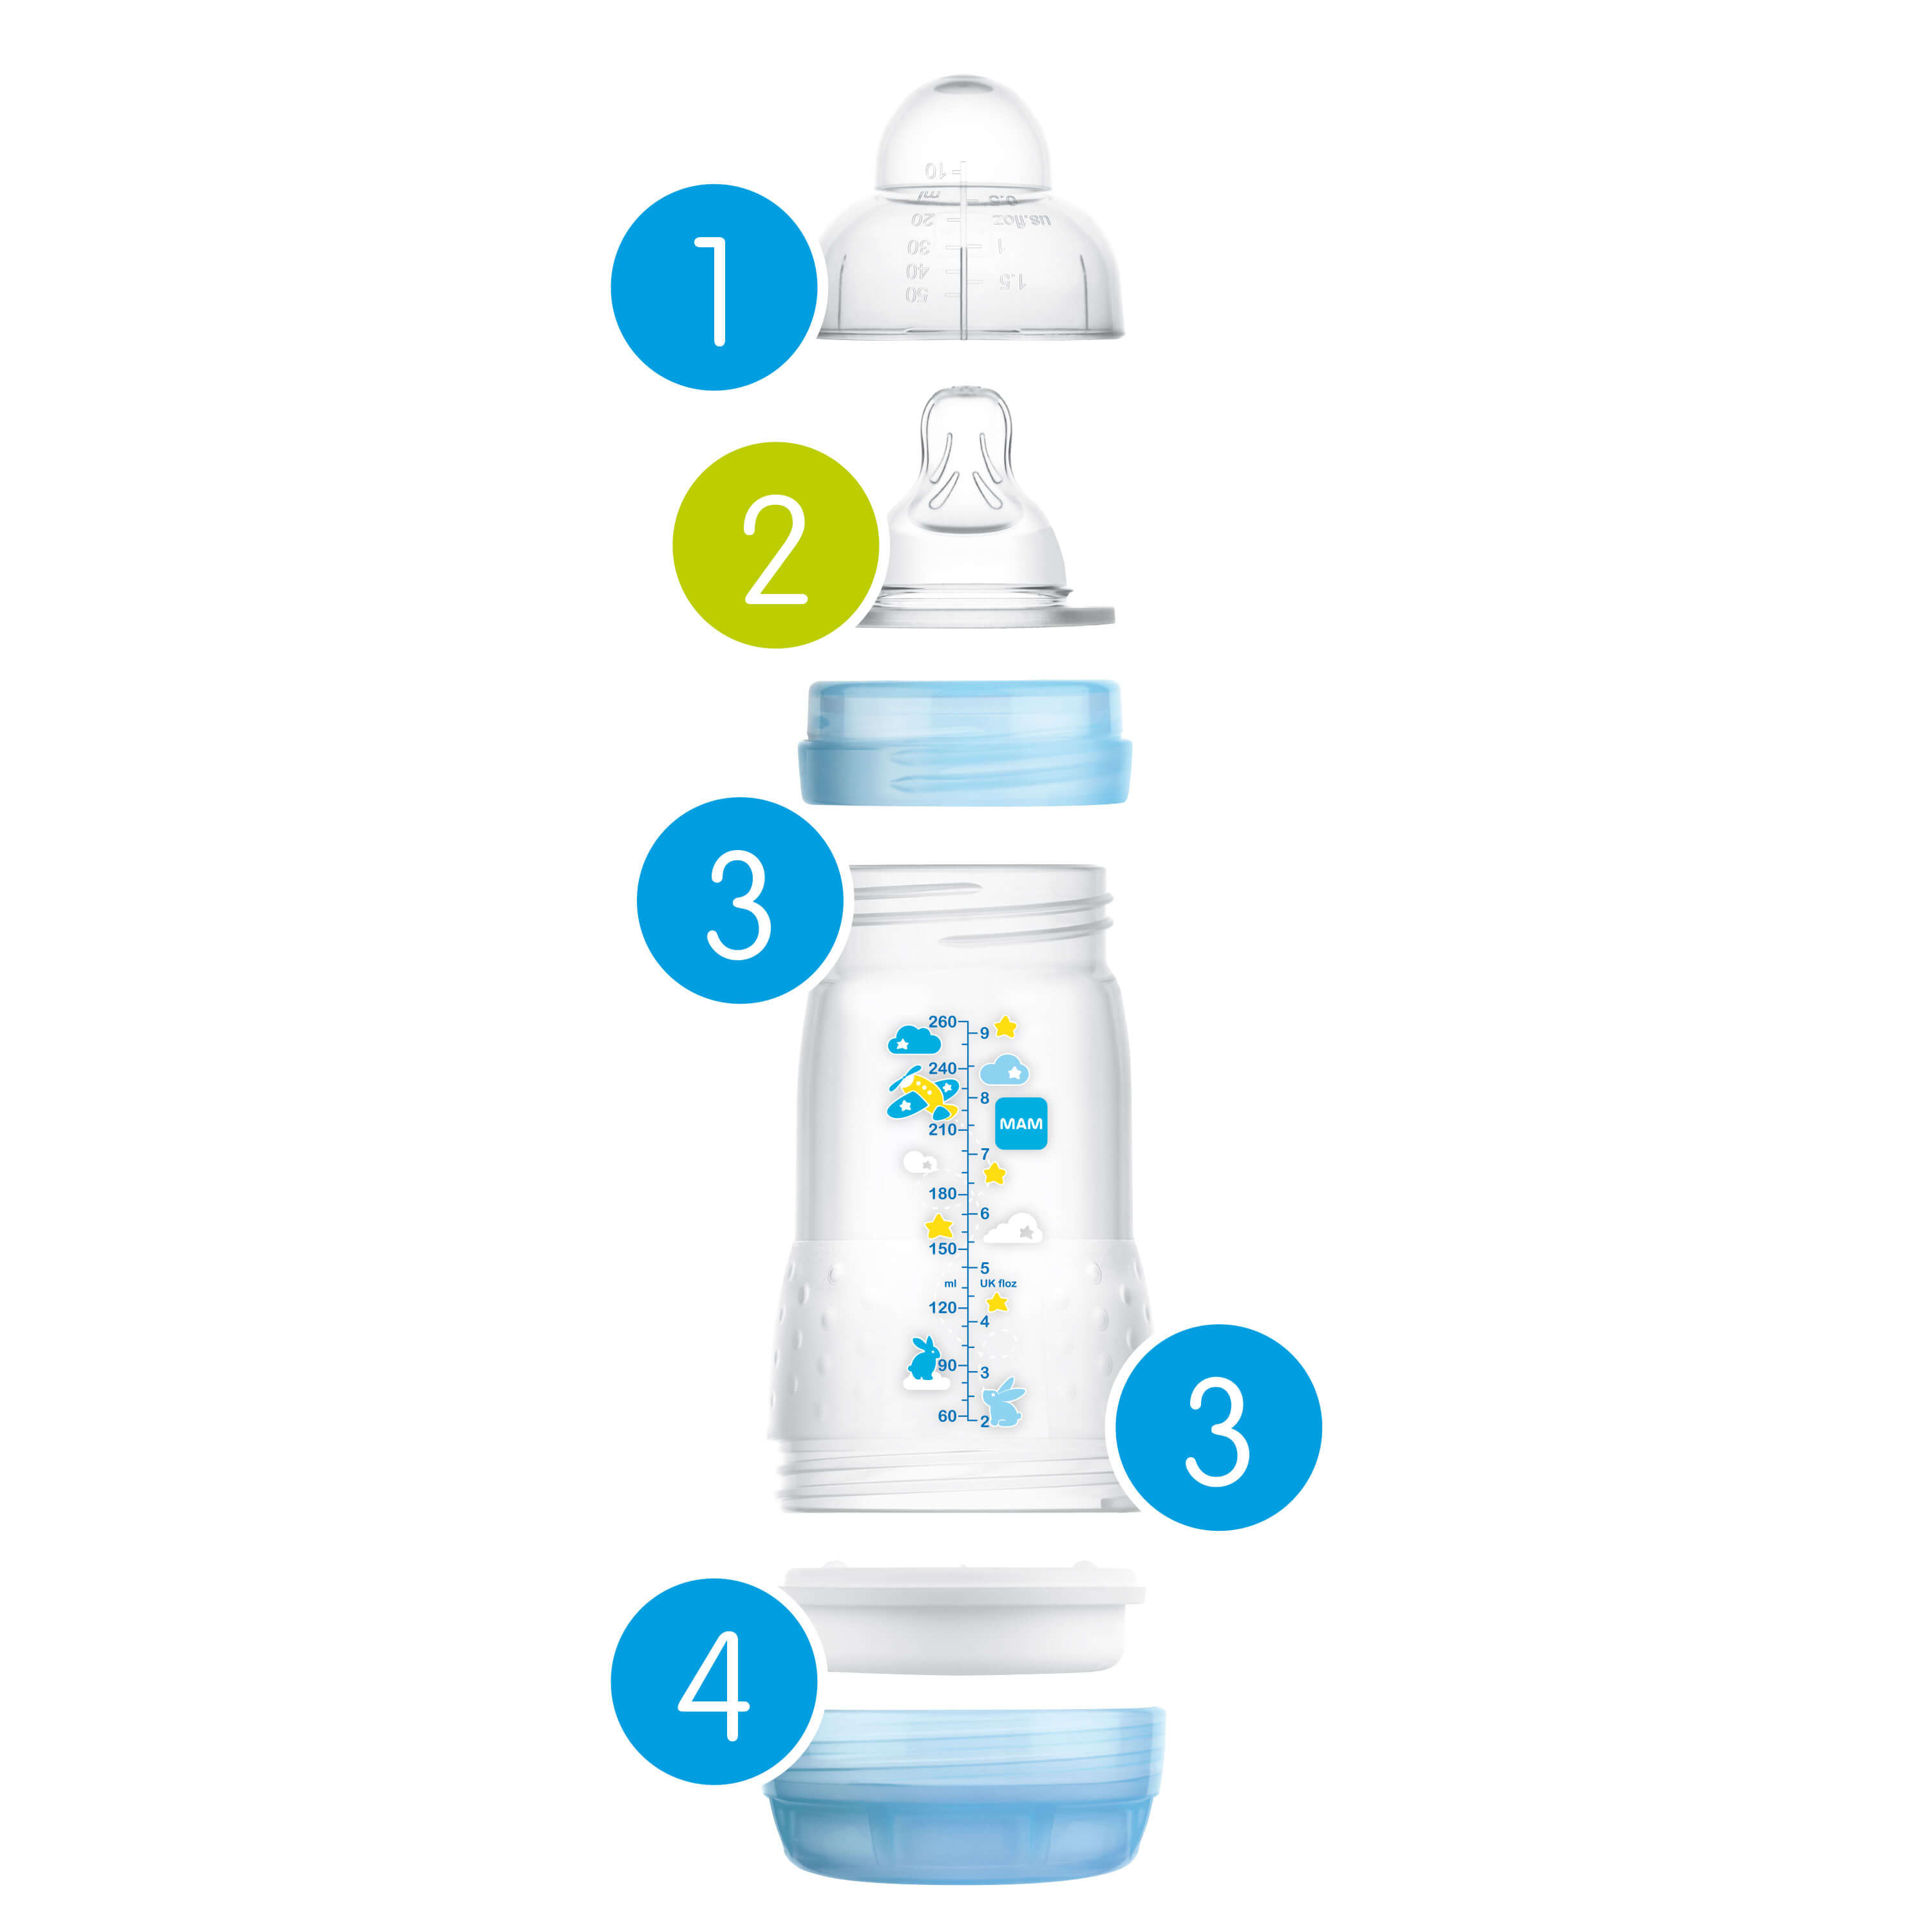 MAM Baby SelfSterilising Anti-ColicBottle with vented bas260ml NEUTRAL COLOUR X2 